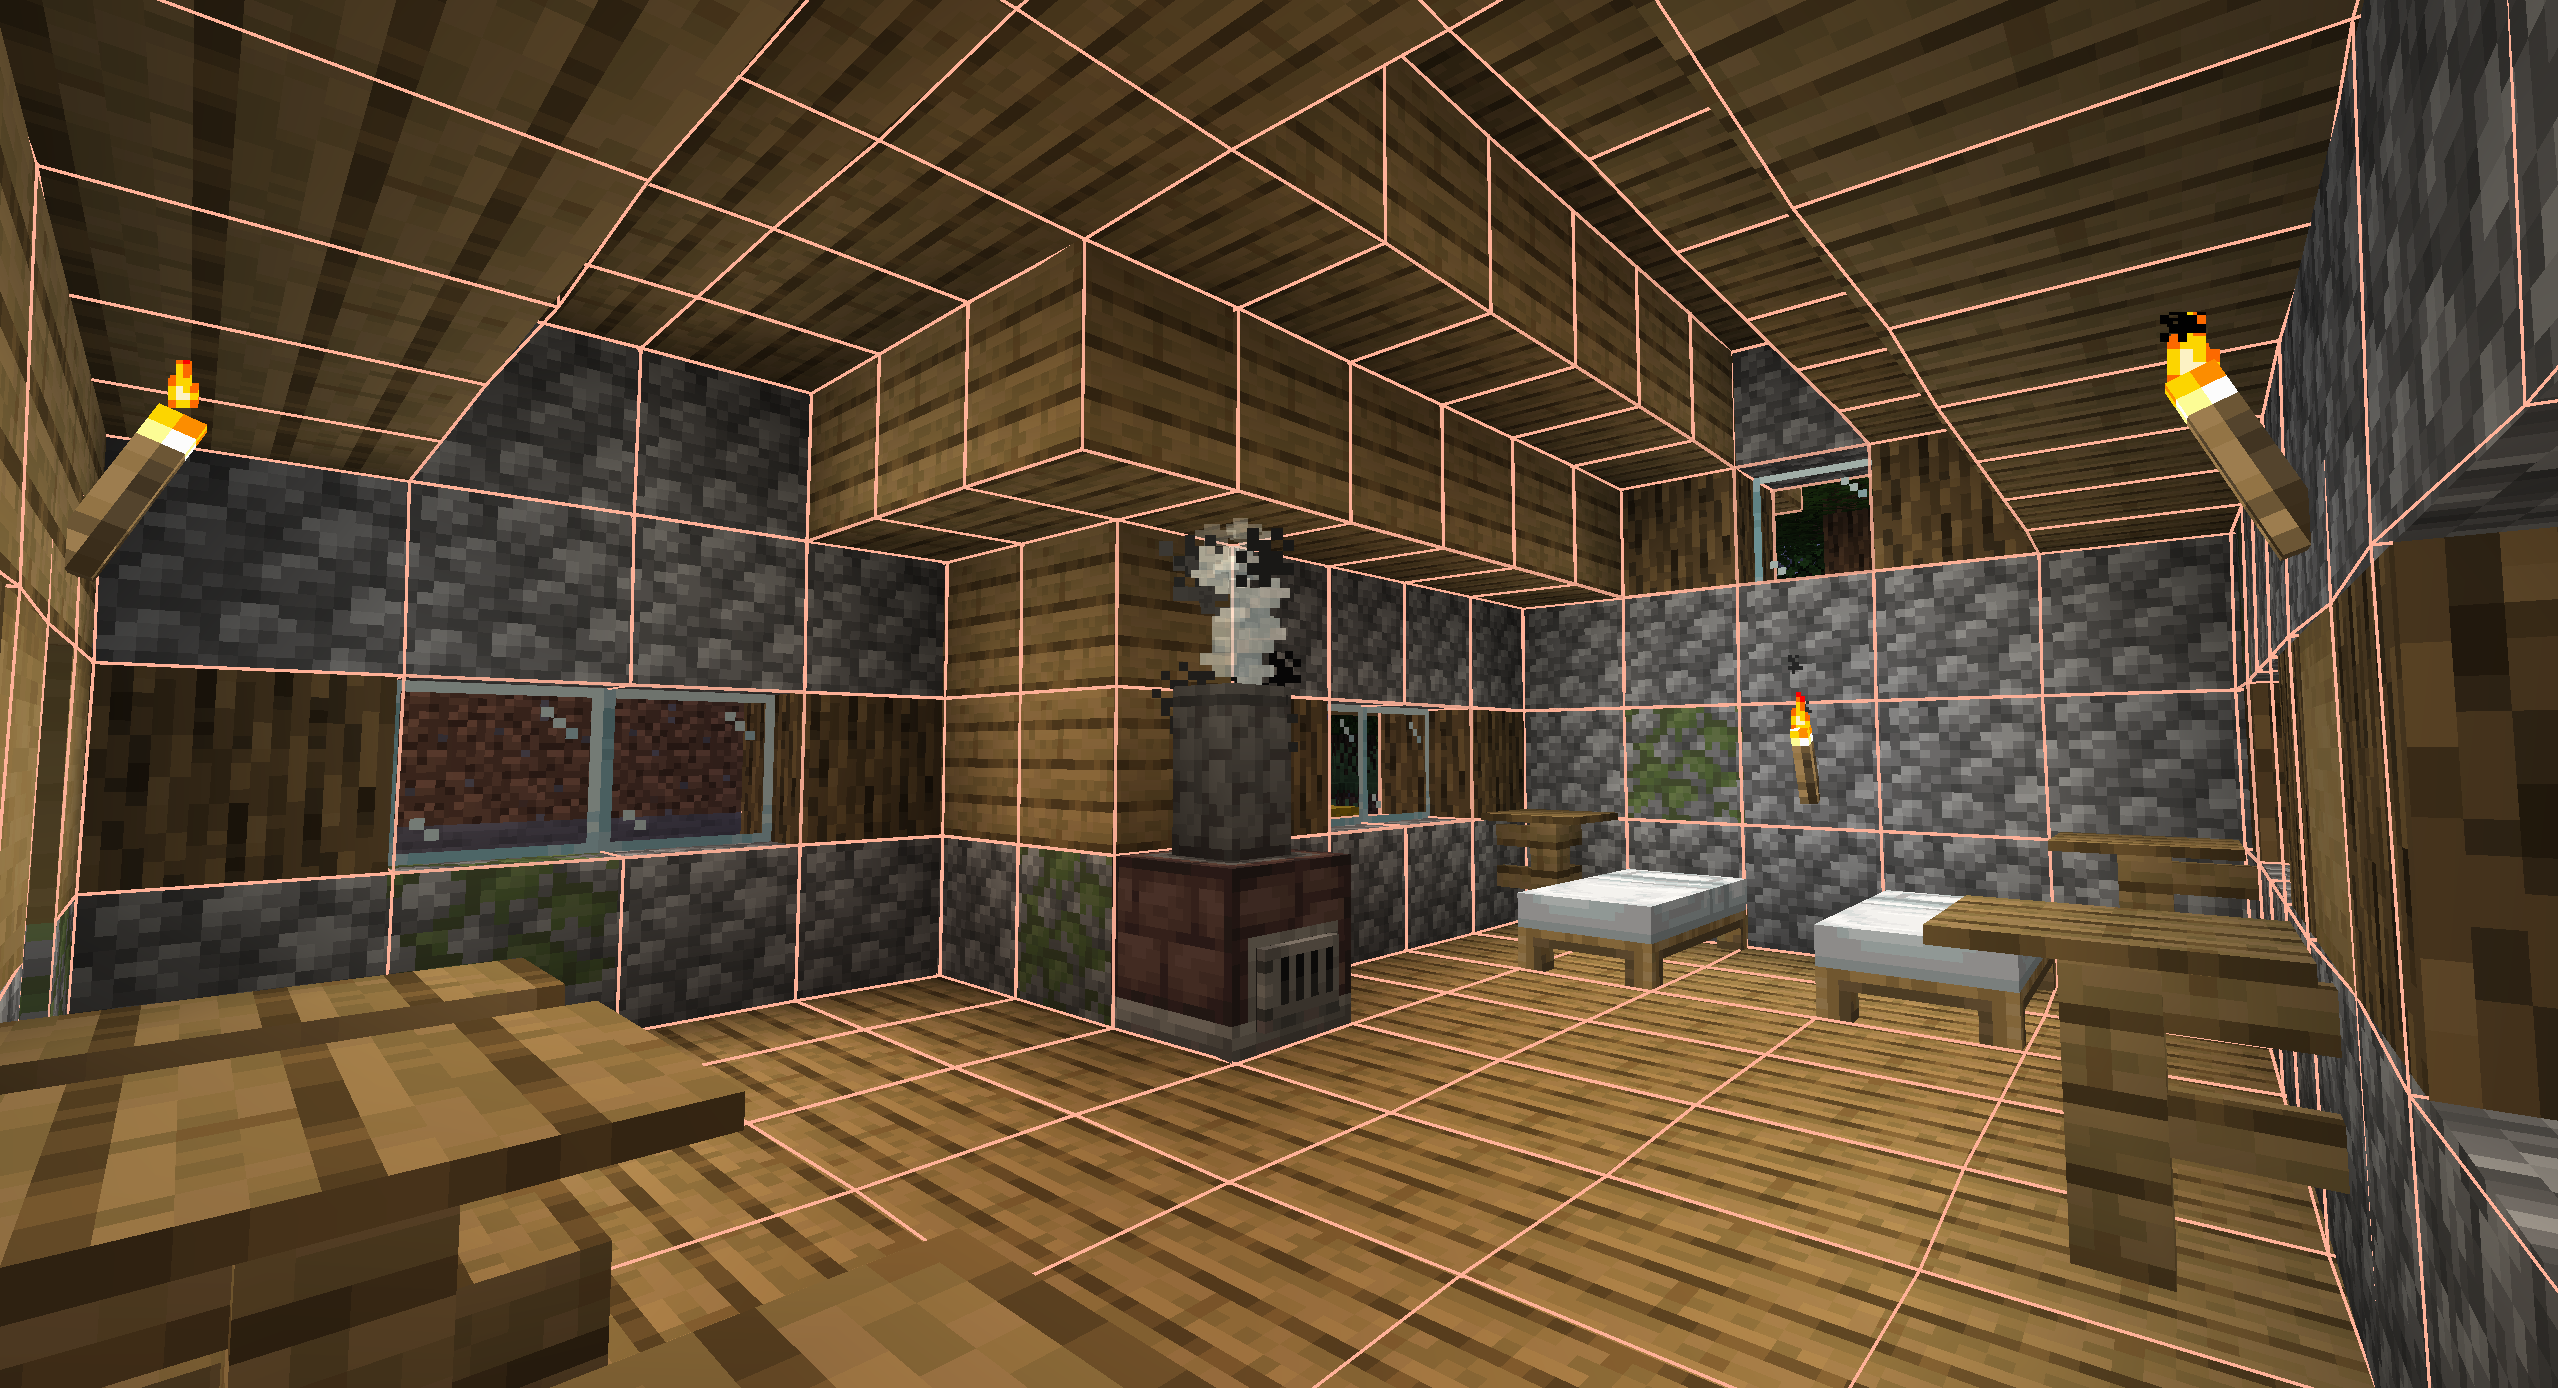 A hearth with debug mode in a room